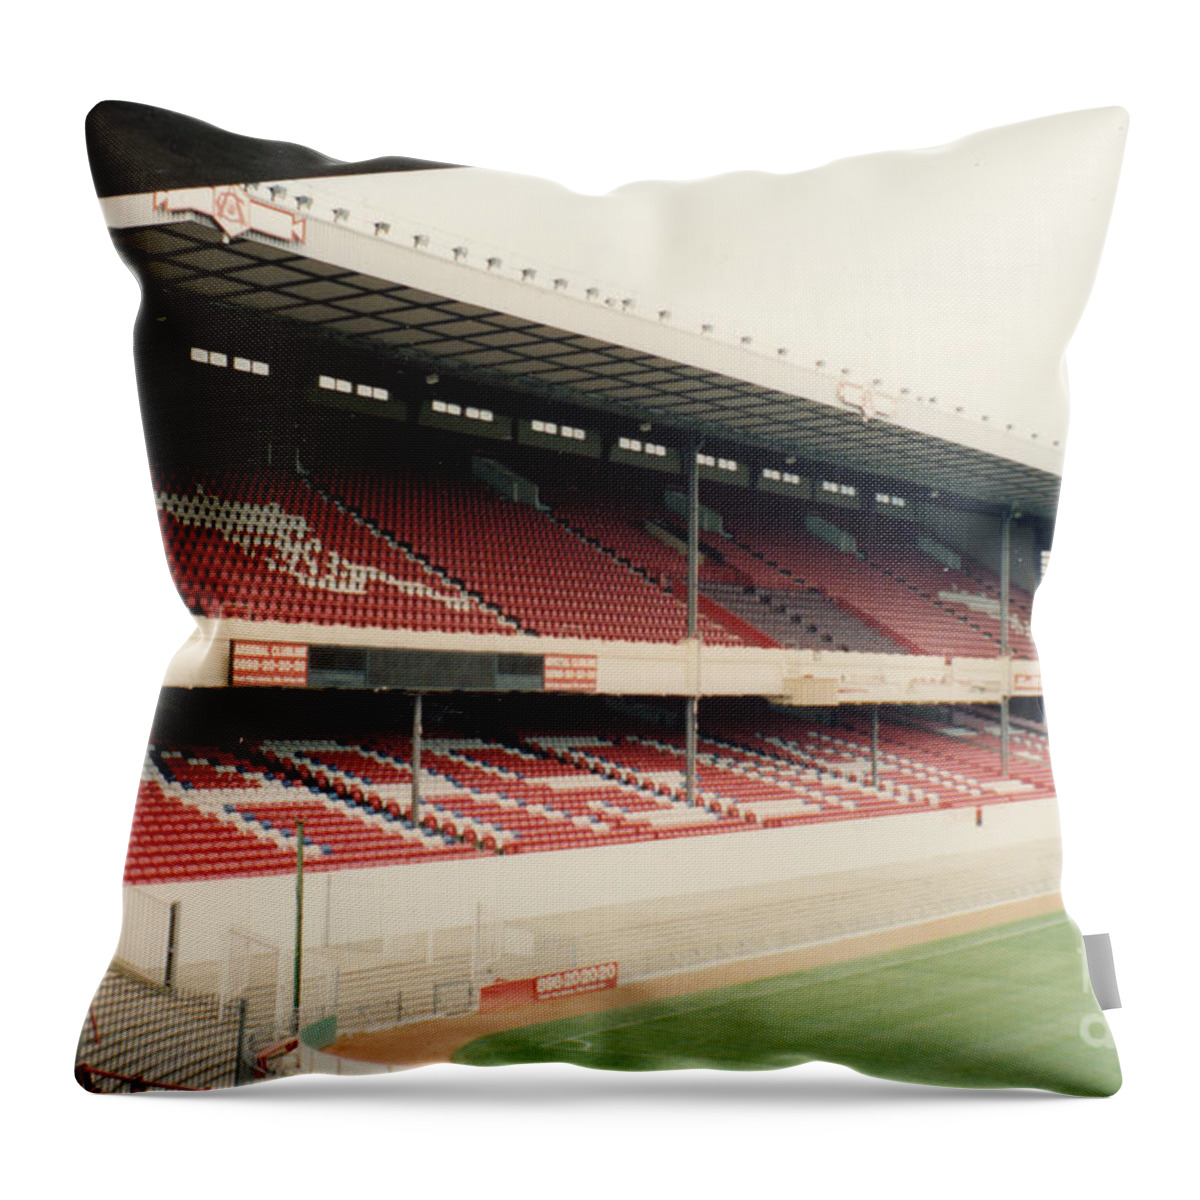 Arsenal Throw Pillow featuring the photograph Arsenal - Highbury - West Stand 2 - 1991 by Legendary Football Grounds